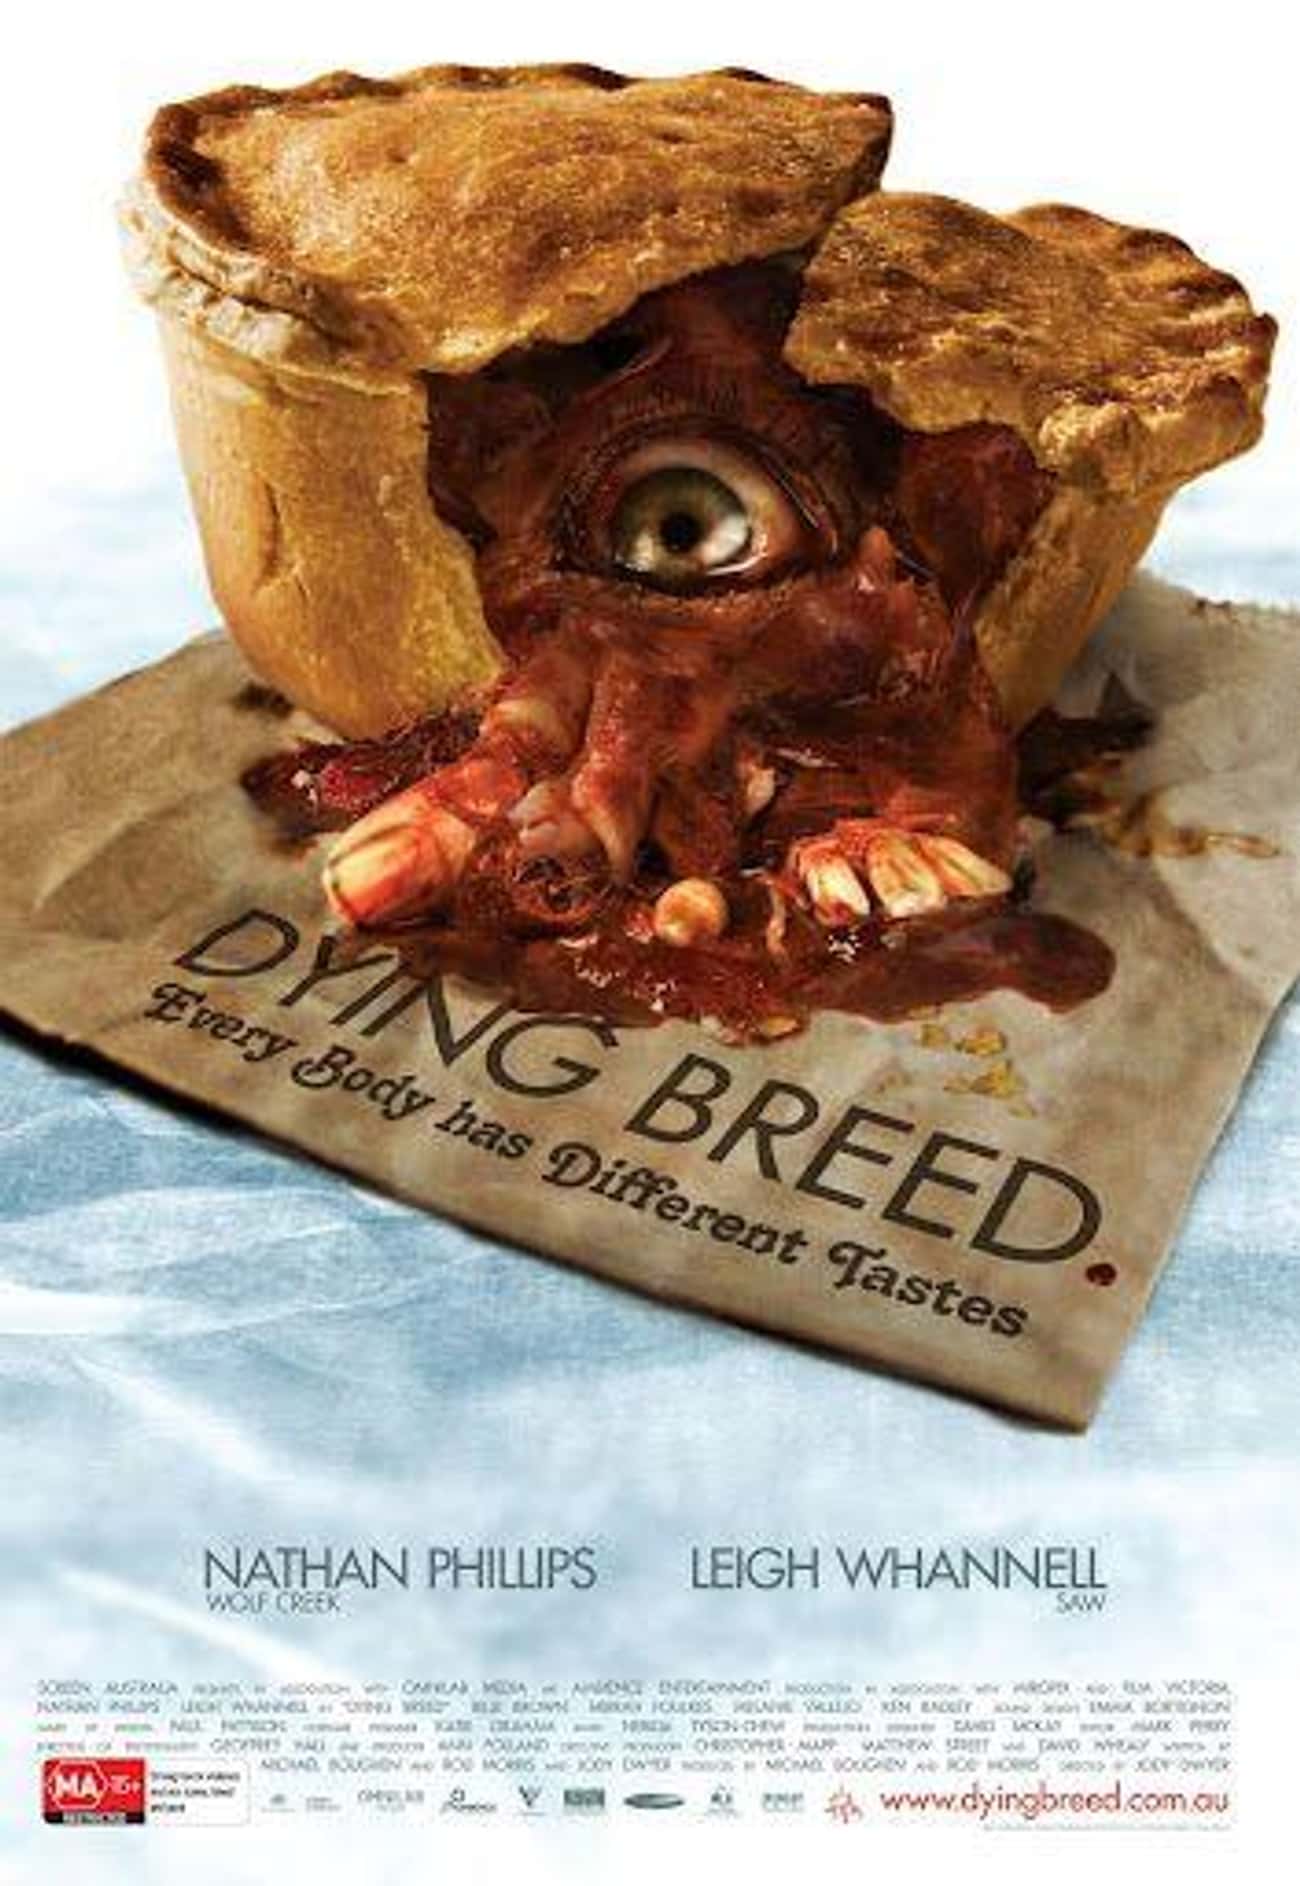 The 'Dying Breed' Poster Turned Public Transit Riders' Stomachs